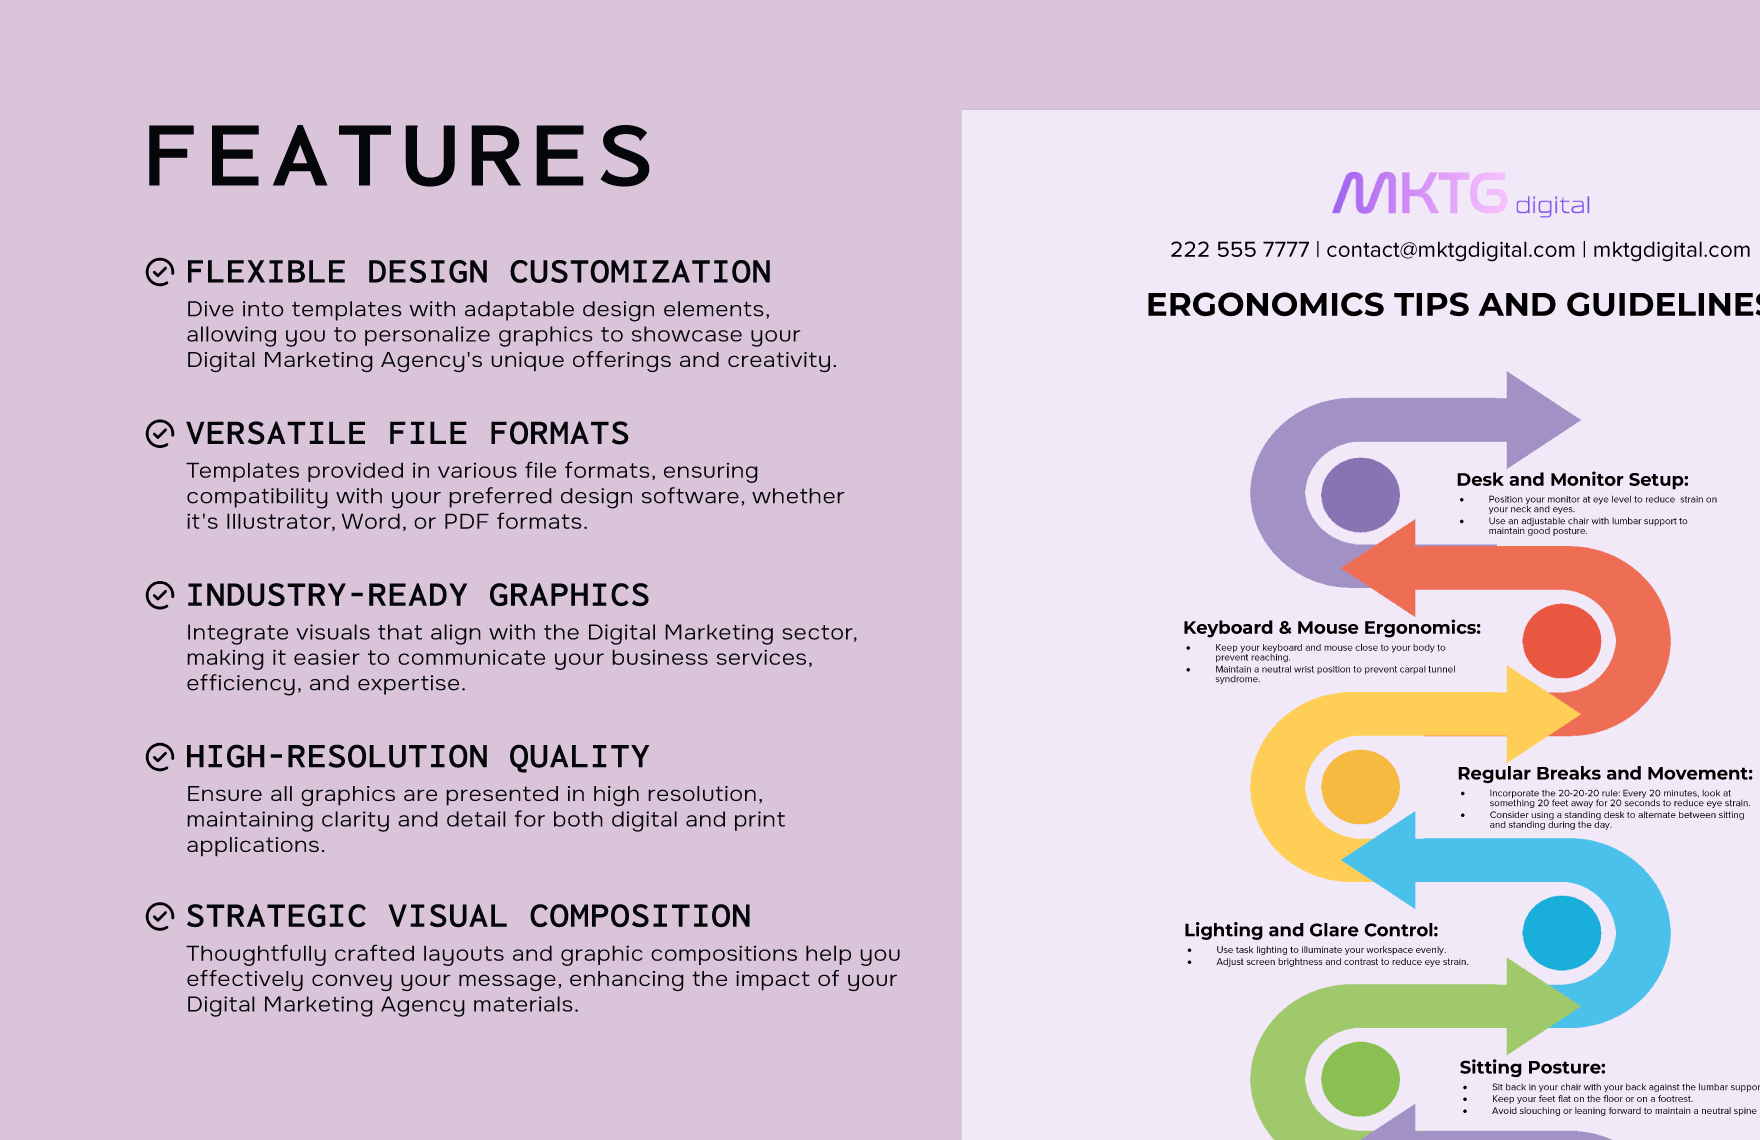 Digital Marketing Agency Ergonomic Tips and Guidelines Infographic Template